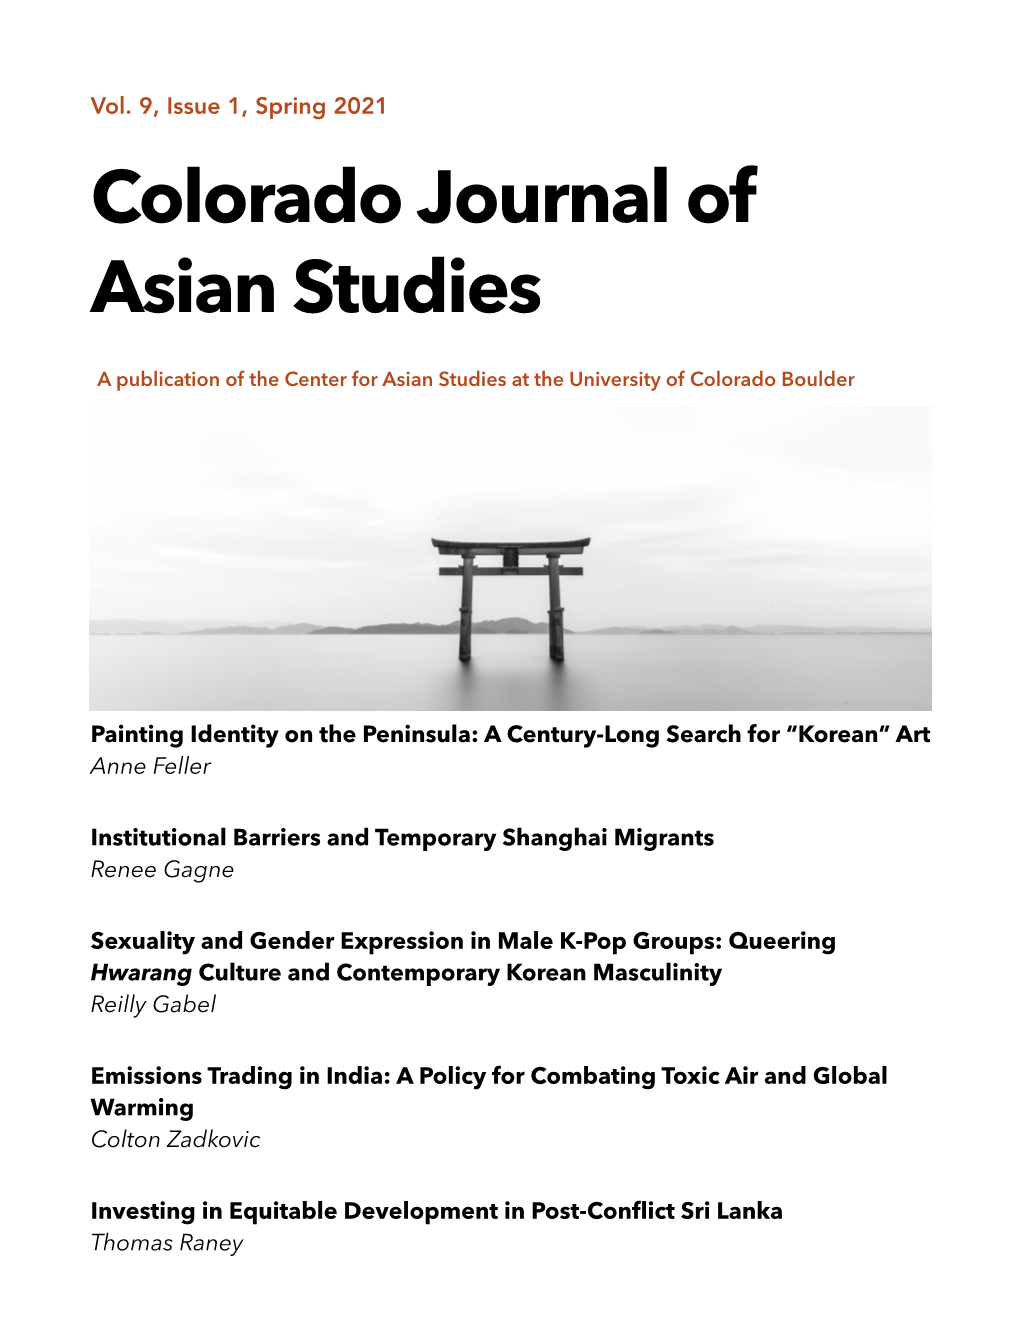 Colorado Journal of Asian Studies, Volume 9, Issue 1